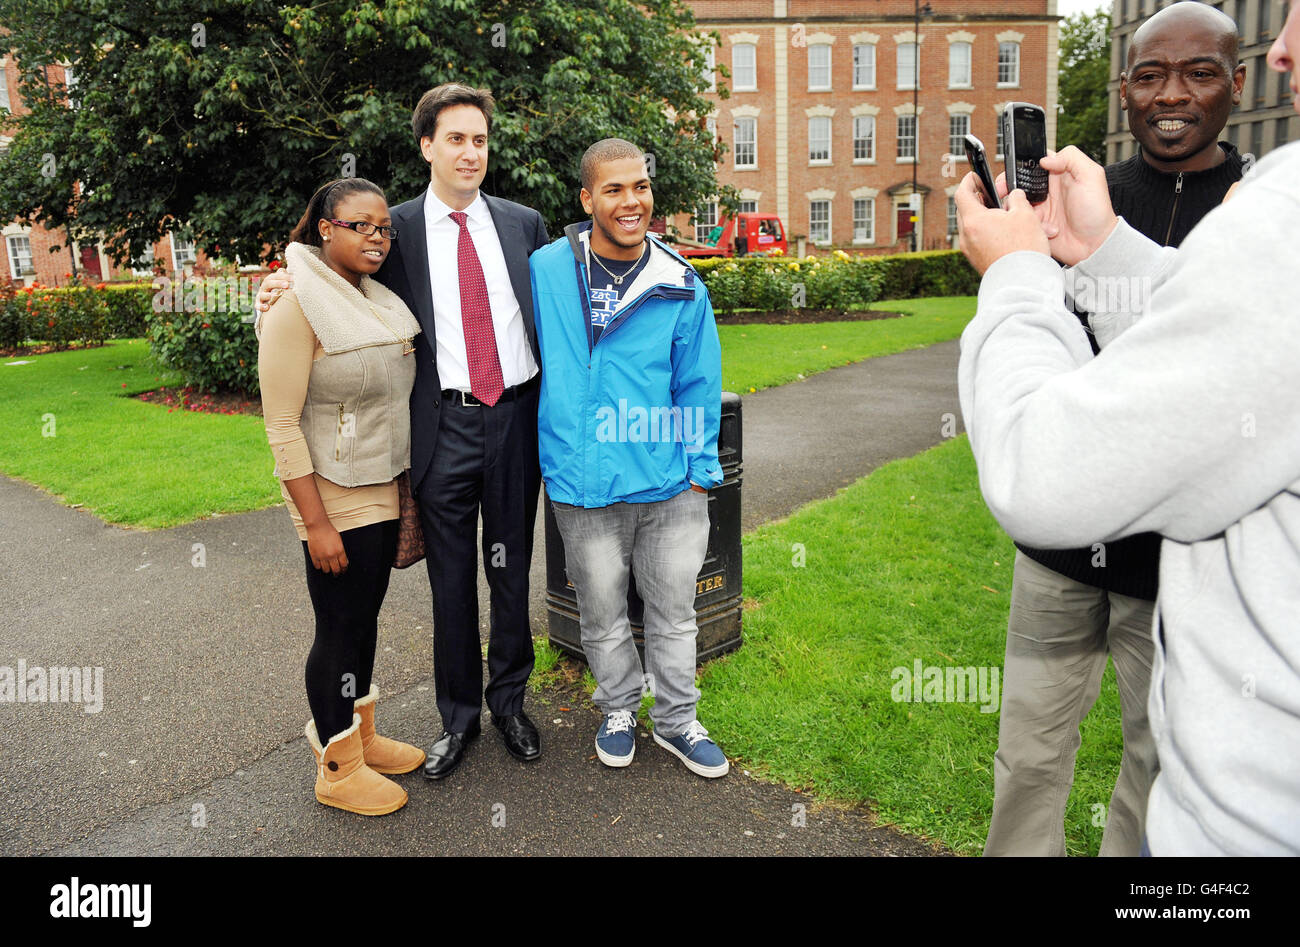 Labour leader Ed Miliband poses for Facebook pictures in St Pauls in Bristol with local community activist Narraser Gordon, 24 and college student Levi Leopard during a visit to the area following last week's disturbances. Stock Photo